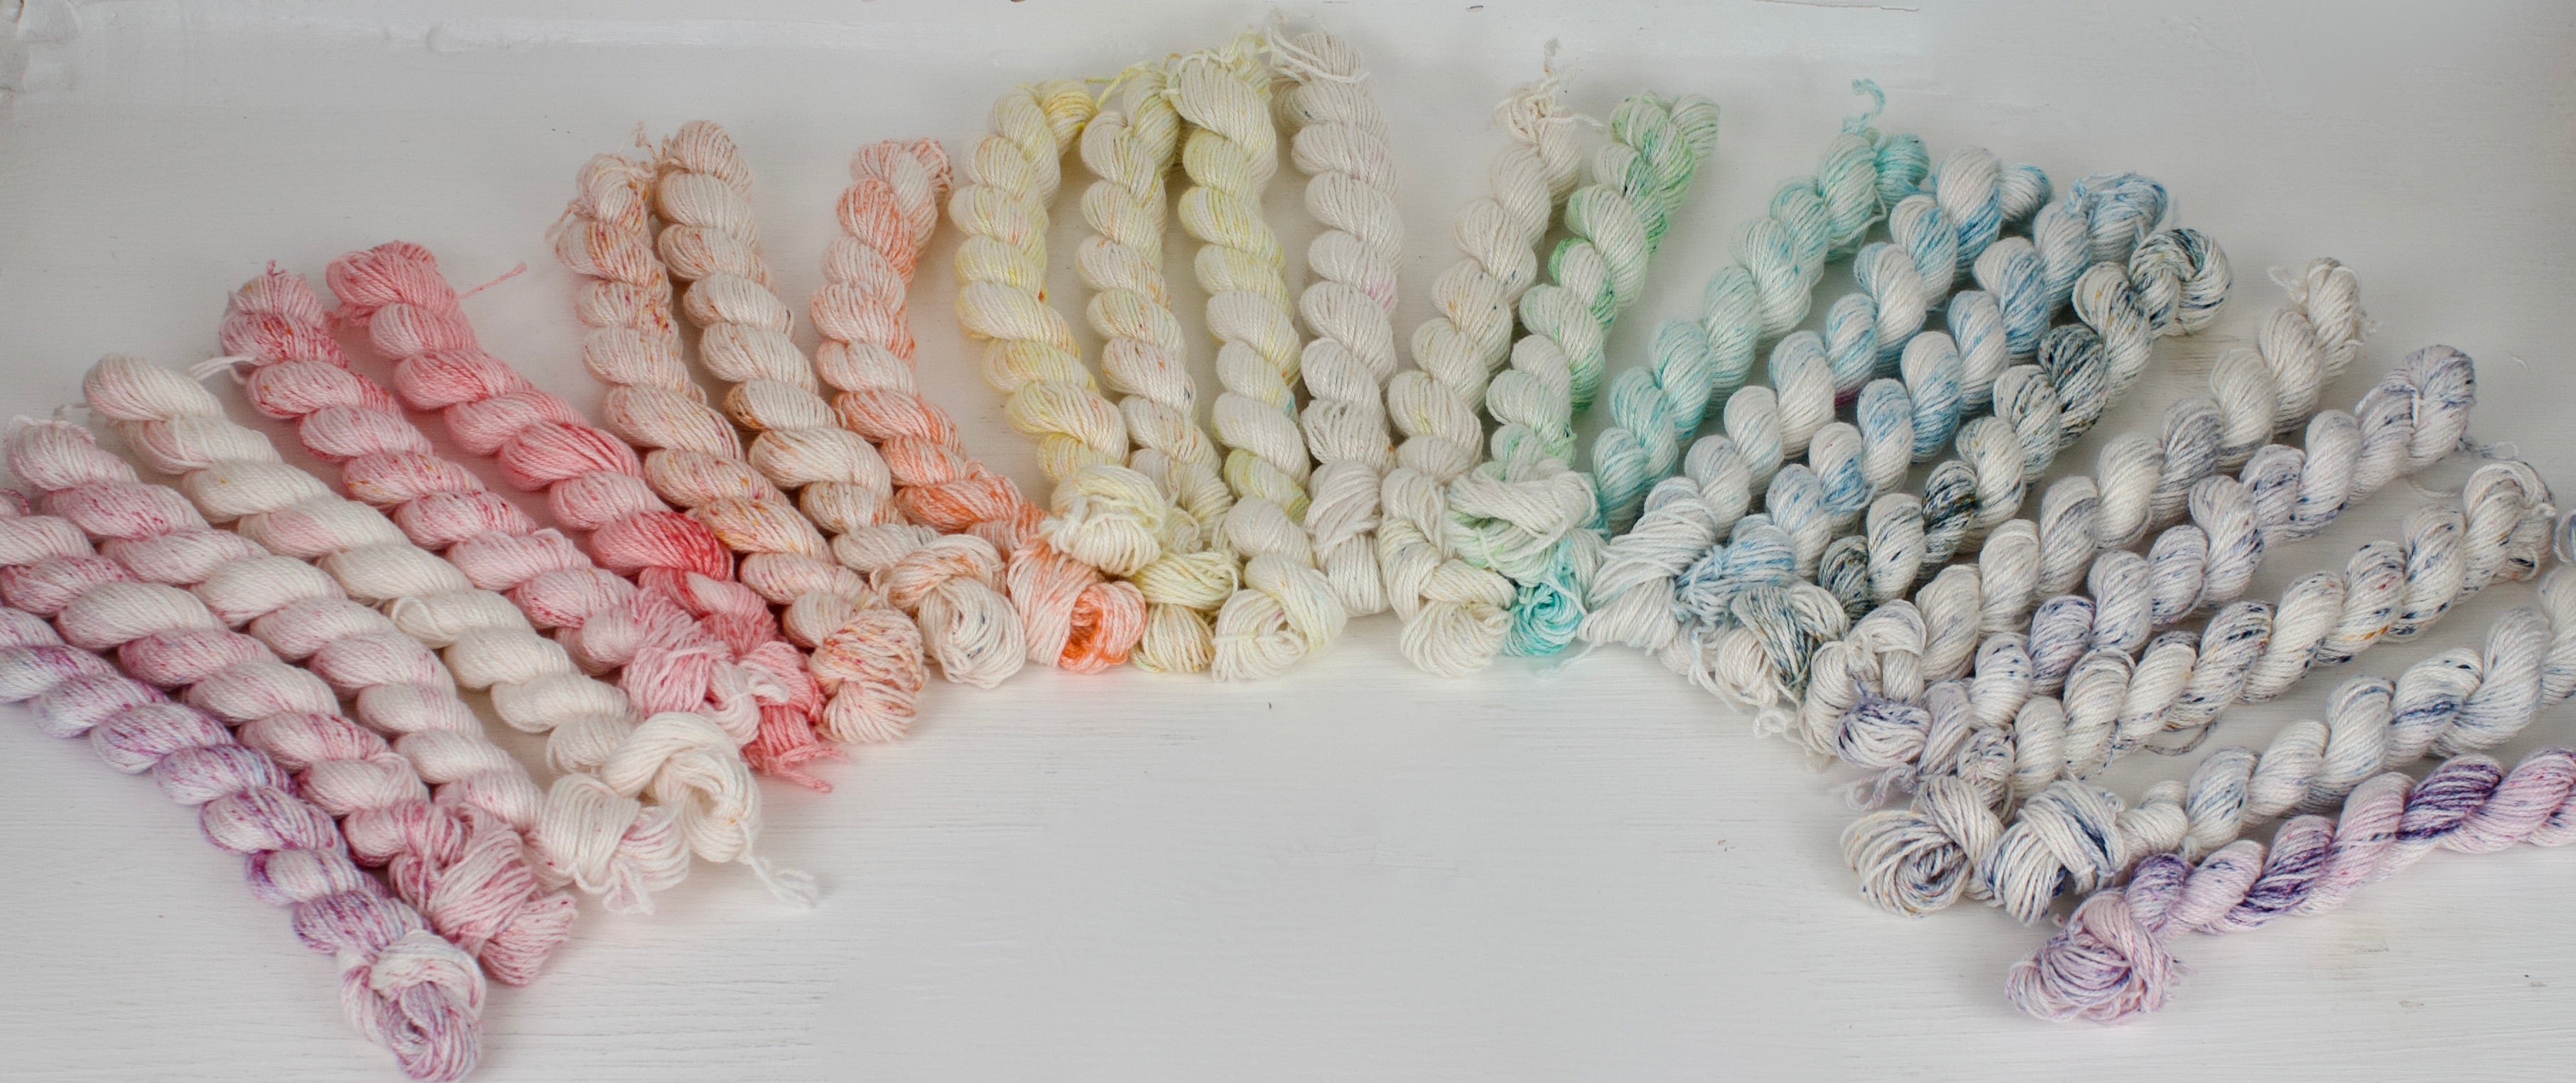 Image Banner: speckled mini skeins fanned out in a rainbow, yarn shown is from the festive calendar kit